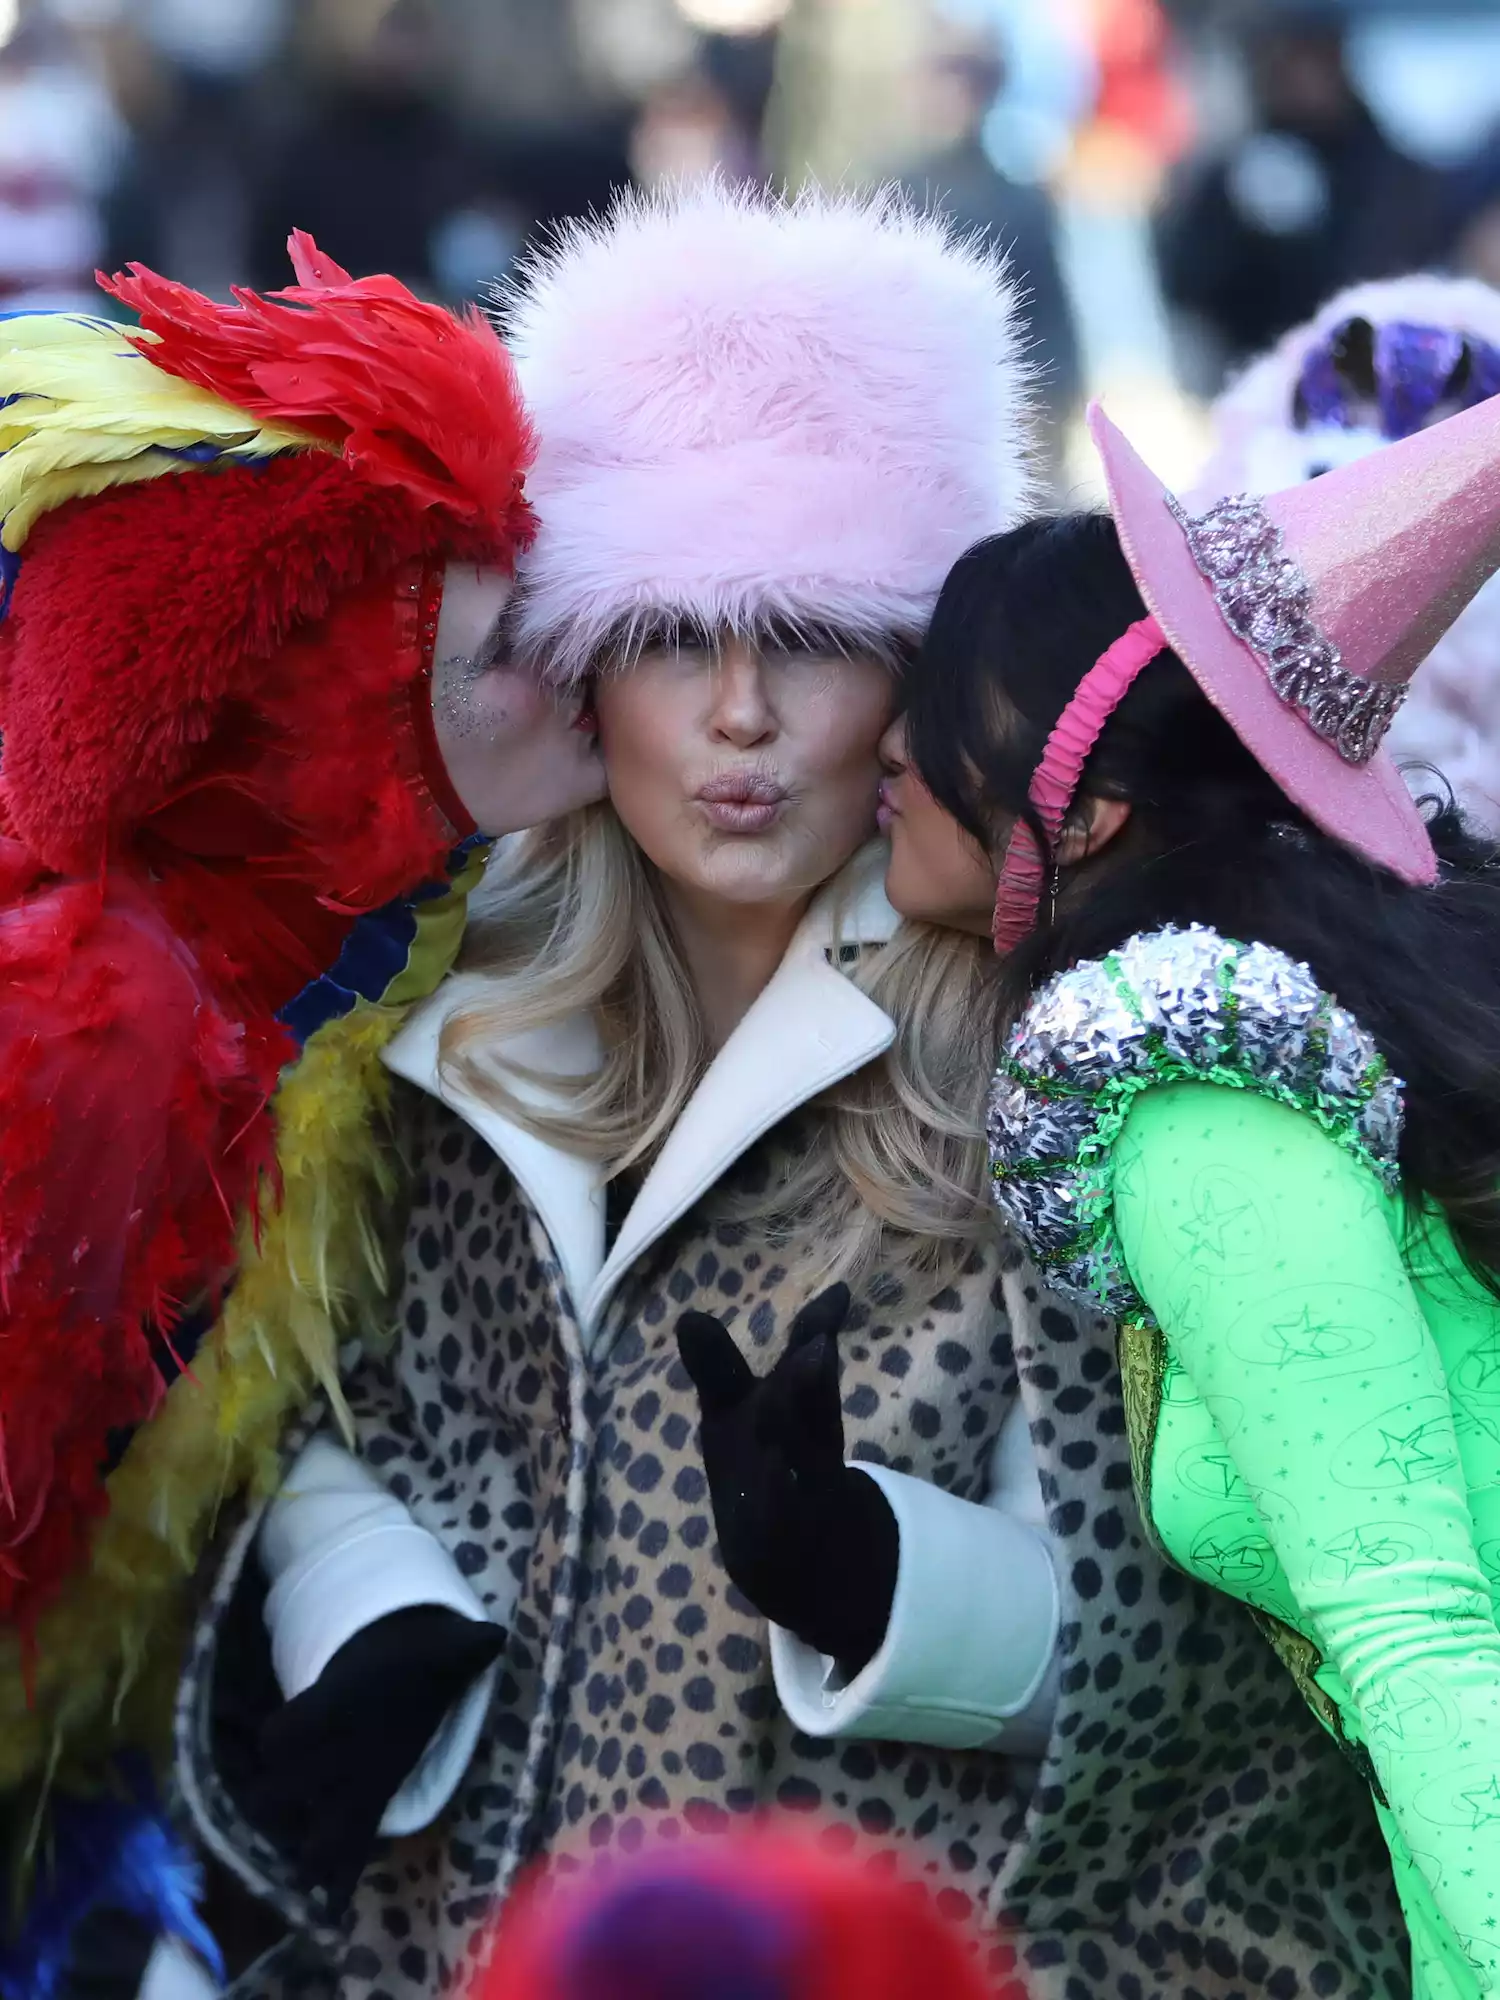 Jennifer Coolidge wears a pink fluffy hat and cheetah print coat to the 2023 Hasty Pudding Theatricals Parade